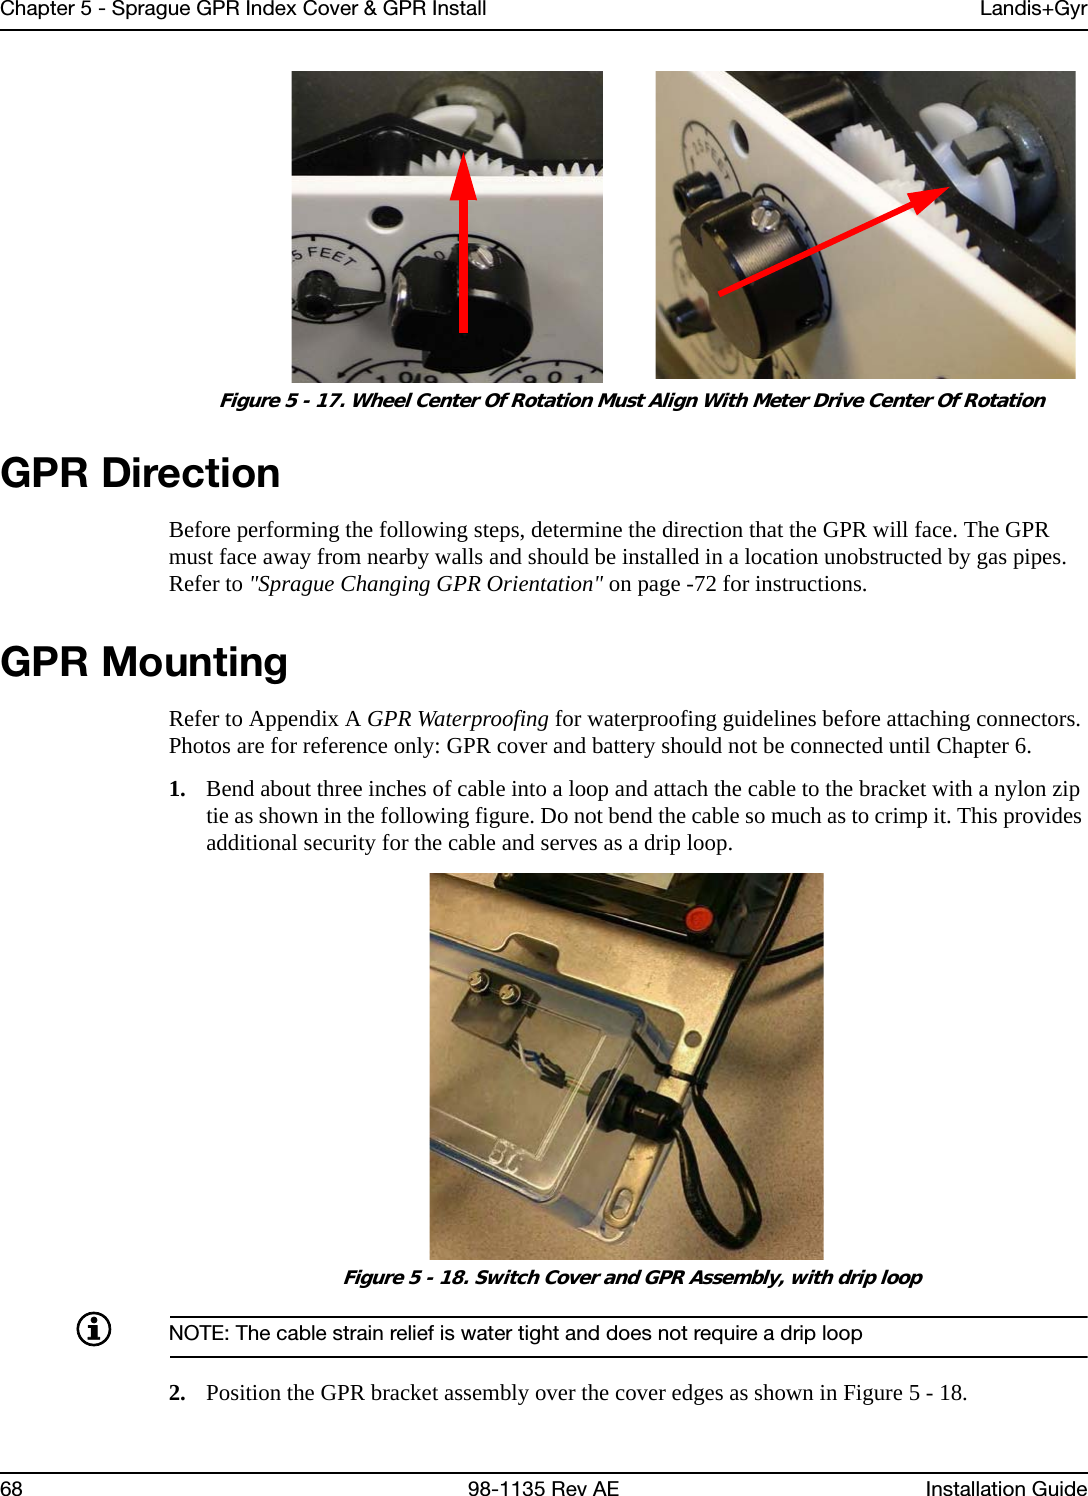 Chapter 5 - Sprague GPR Index Cover &amp; GPR Install Landis+Gyr68 98-1135 Rev AE Installation Guide Figure 5 - 17. Wheel Center Of Rotation Must Align With Meter Drive Center Of RotationGPR DirectionBefore performing the following steps, determine the direction that the GPR will face. The GPR must face away from nearby walls and should be installed in a location unobstructed by gas pipes. Refer to &quot;Sprague Changing GPR Orientation&quot; on page -72 for instructions.GPR MountingRefer to Appendix A GPR Waterproofing for waterproofing guidelines before attaching connectors. Photos are for reference only: GPR cover and battery should not be connected until Chapter 6.1. Bend about three inches of cable into a loop and attach the cable to the bracket with a nylon zip tie as shown in the following figure. Do not bend the cable so much as to crimp it. This provides additional security for the cable and serves as a drip loop. Figure 5 - 18. Switch Cover and GPR Assembly, with drip loopNOTE: The cable strain relief is water tight and does not require a drip loop2. Position the GPR bracket assembly over the cover edges as shown in Figure 5 - 18.